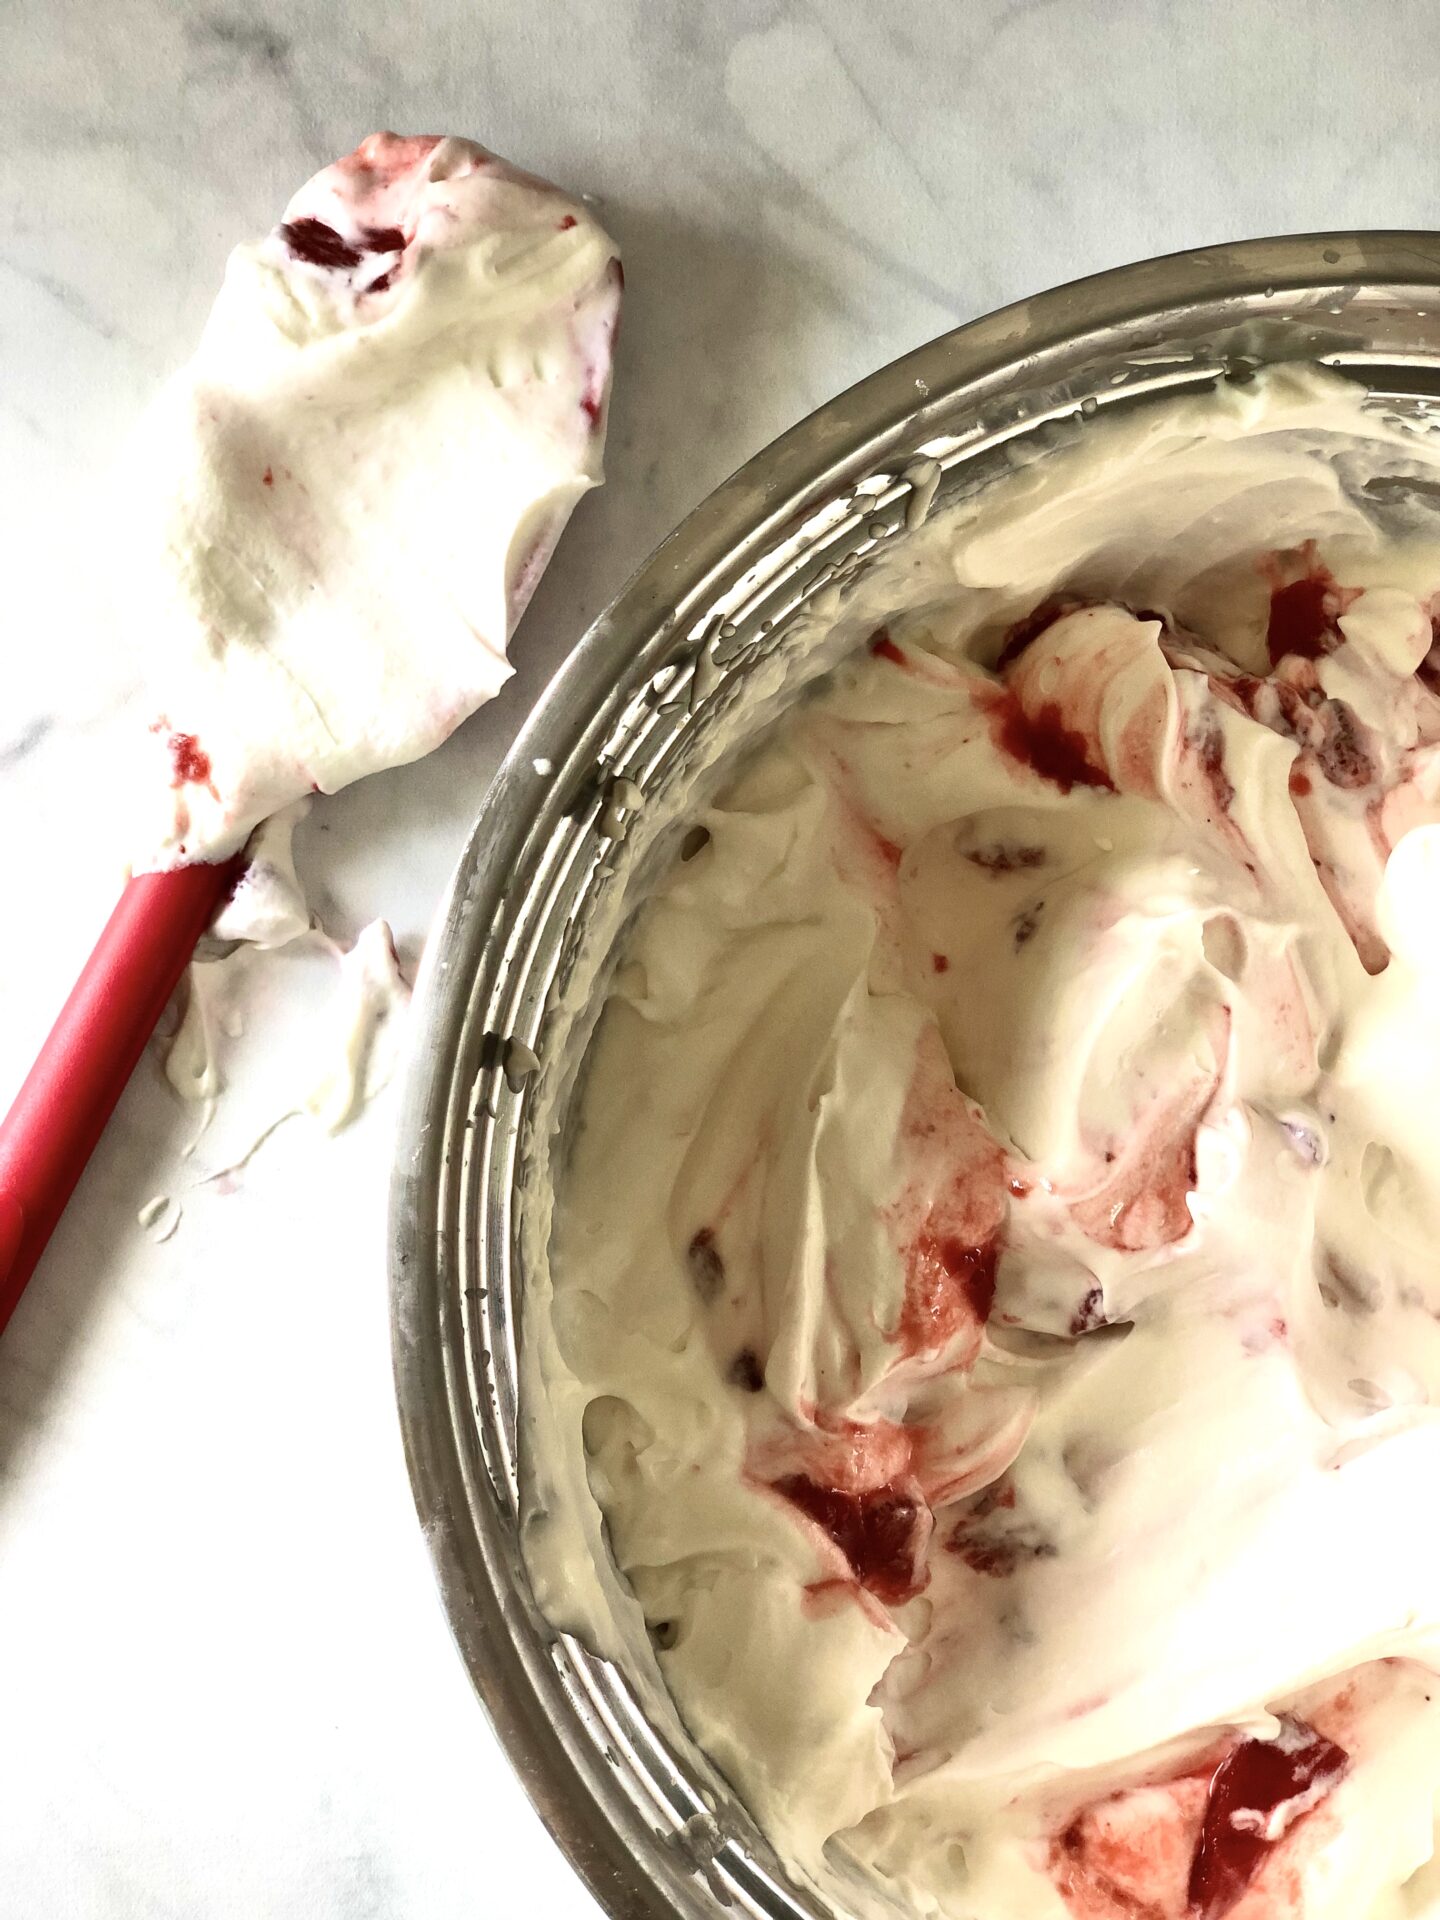 Mixing bowl of strawberries and cream